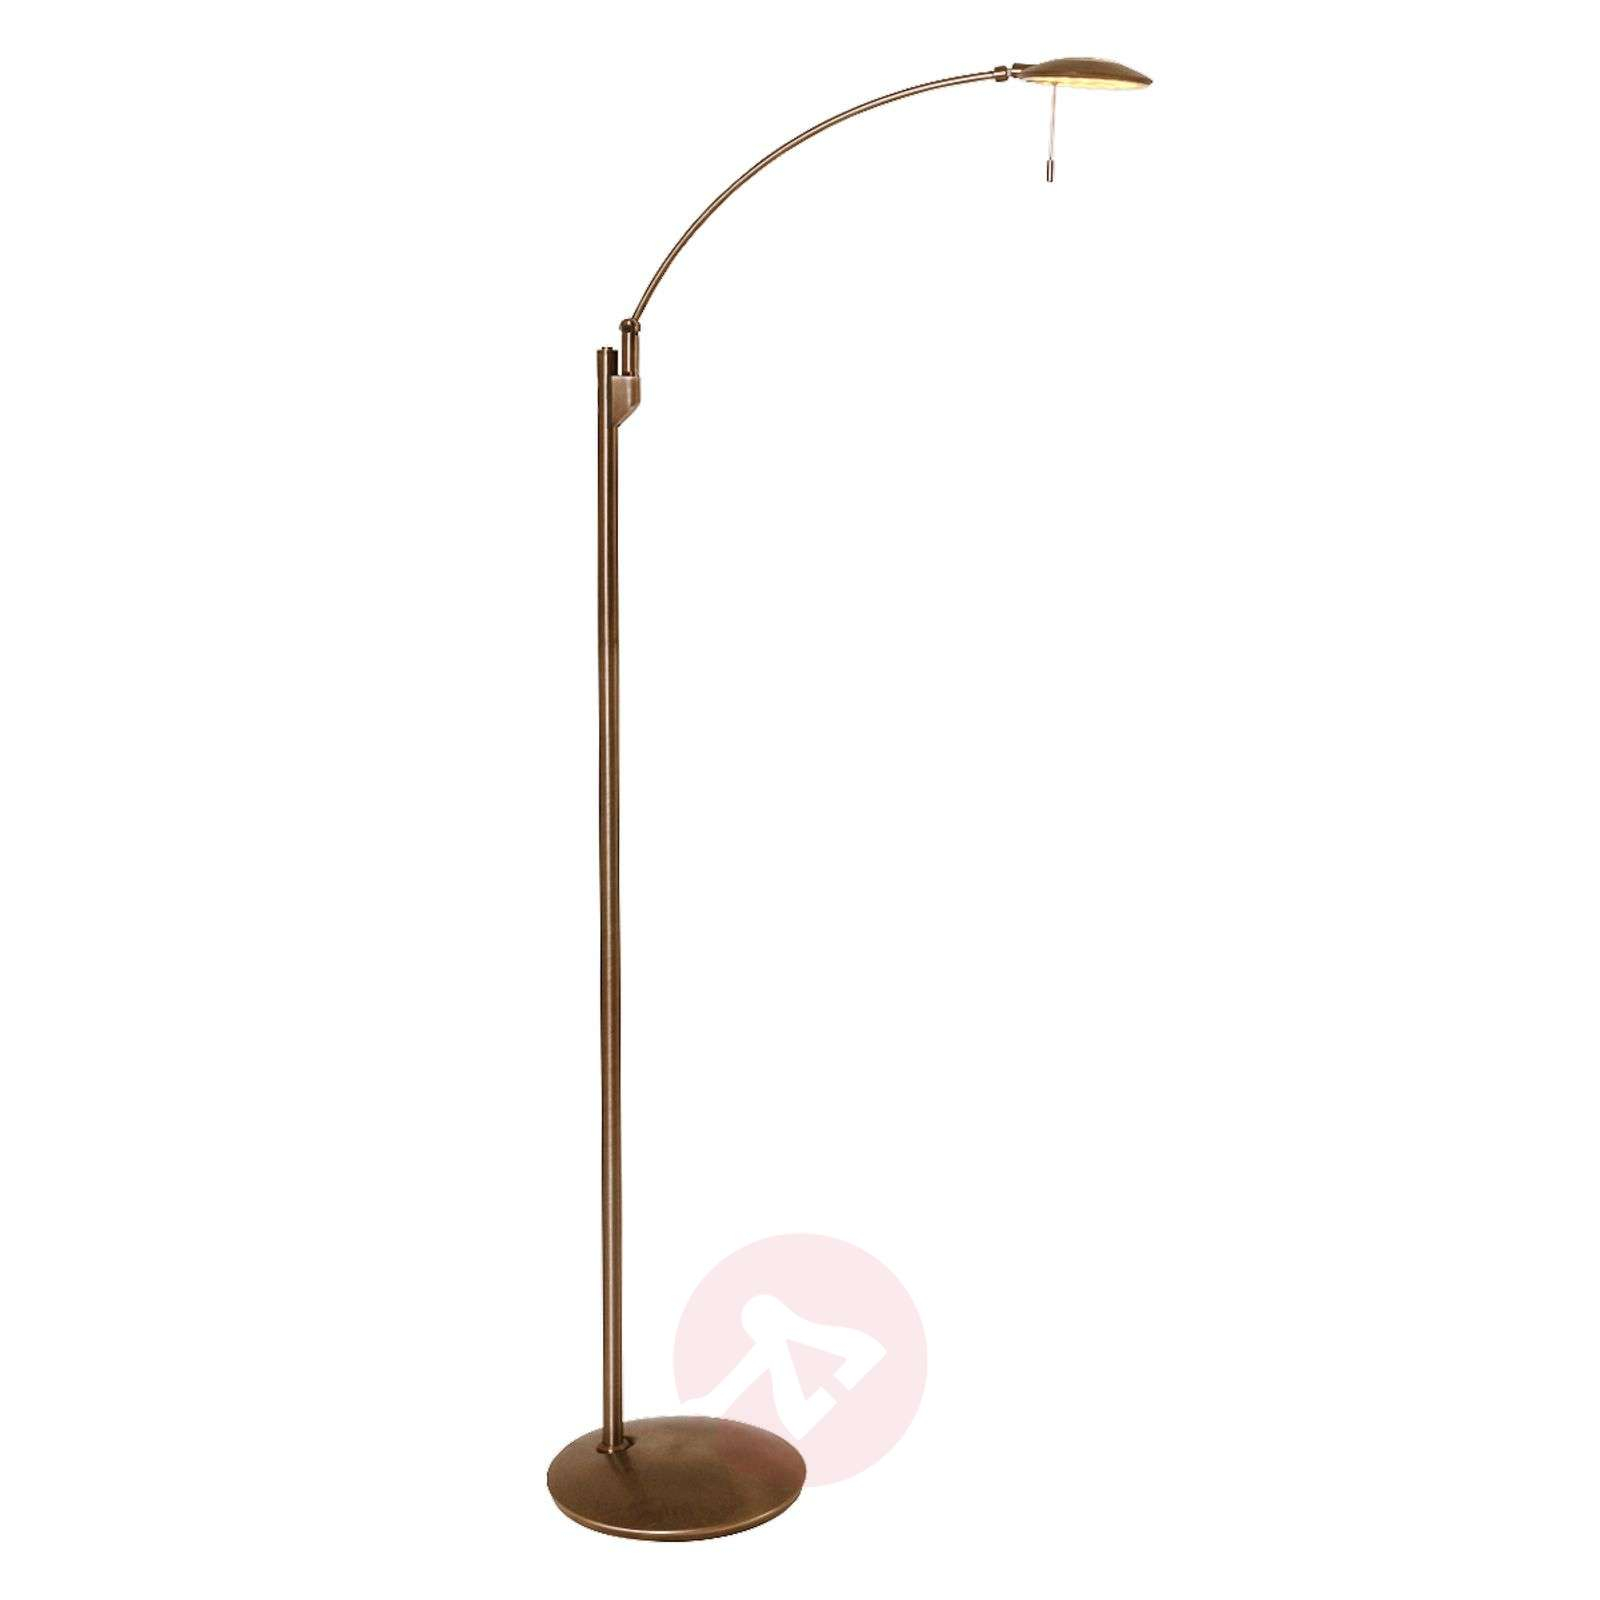 Dimmable Adjustable Led Floor Lamp Zenith Bronze within dimensions 1600 X 1600